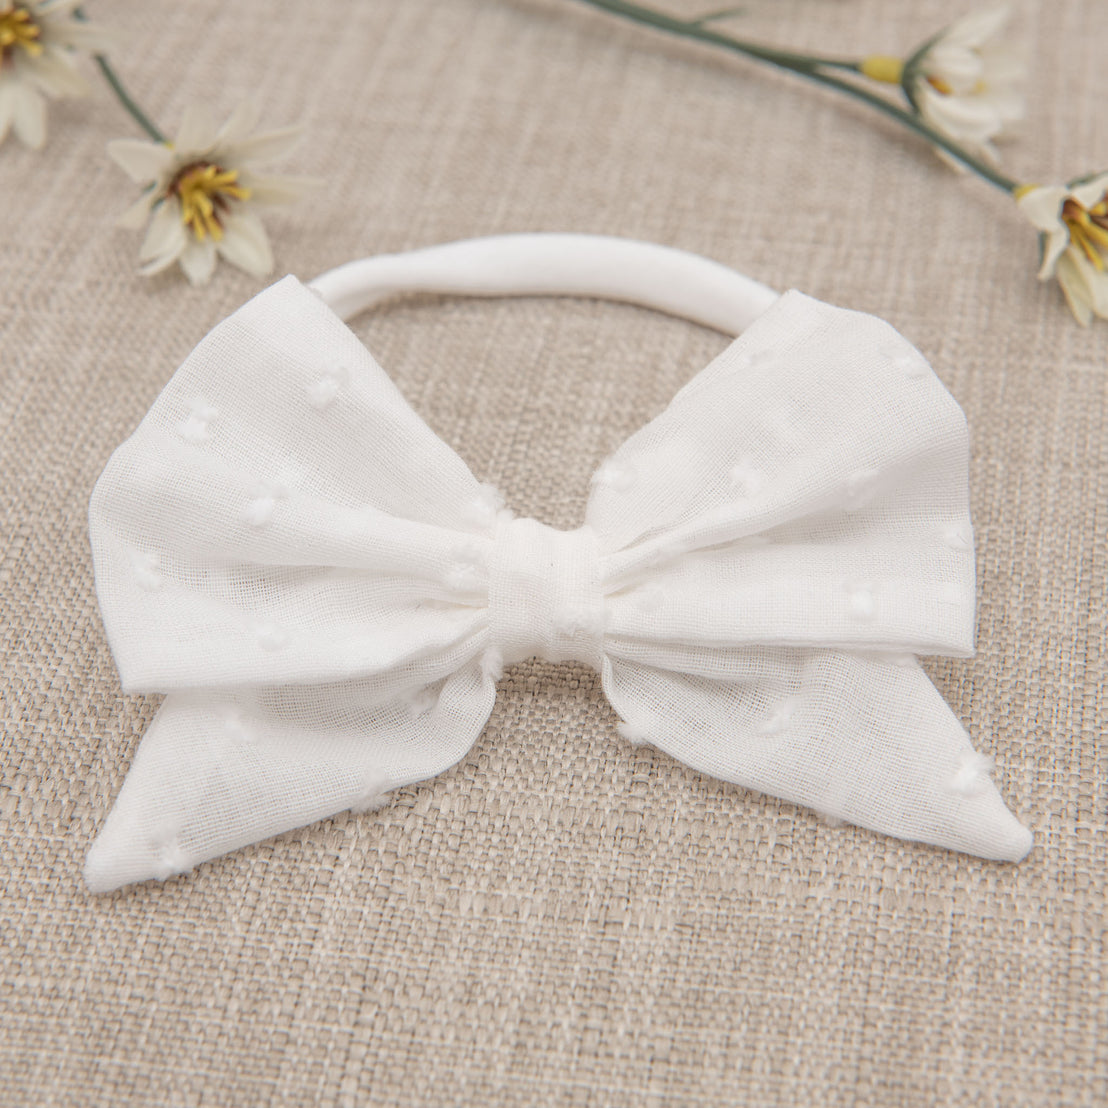 A Mila Bow Headband, a white Dotted Swiss cotton bow attached to a nylon headband, placed on a beige background and surrounded by small white daisies.